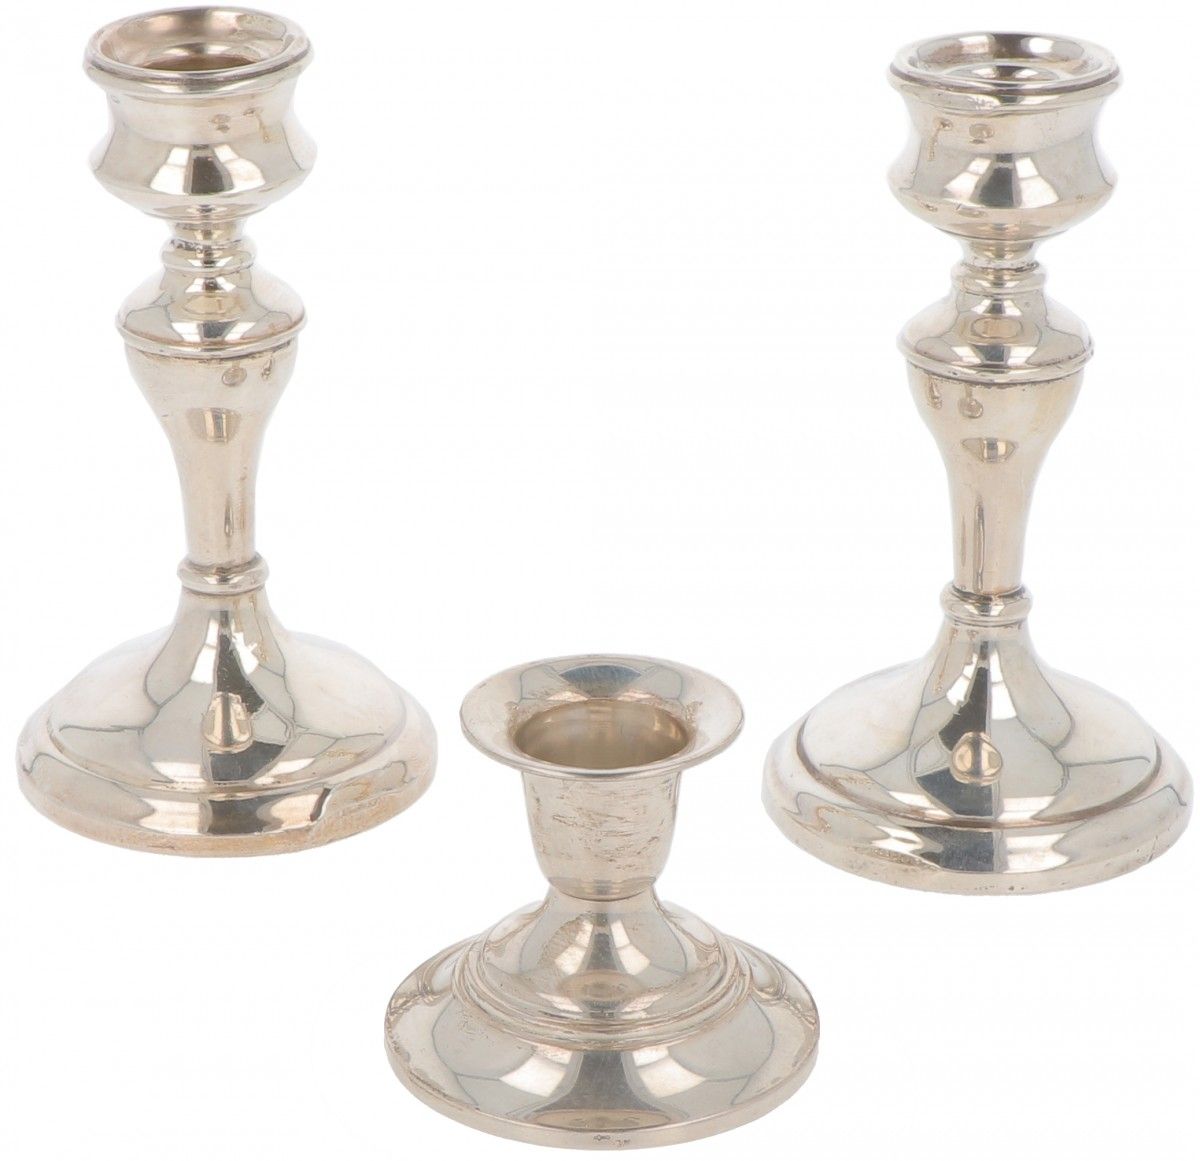 (3) piece lot candlesticks silver. Consisting of a baluster-shaped set with a we&hellip;